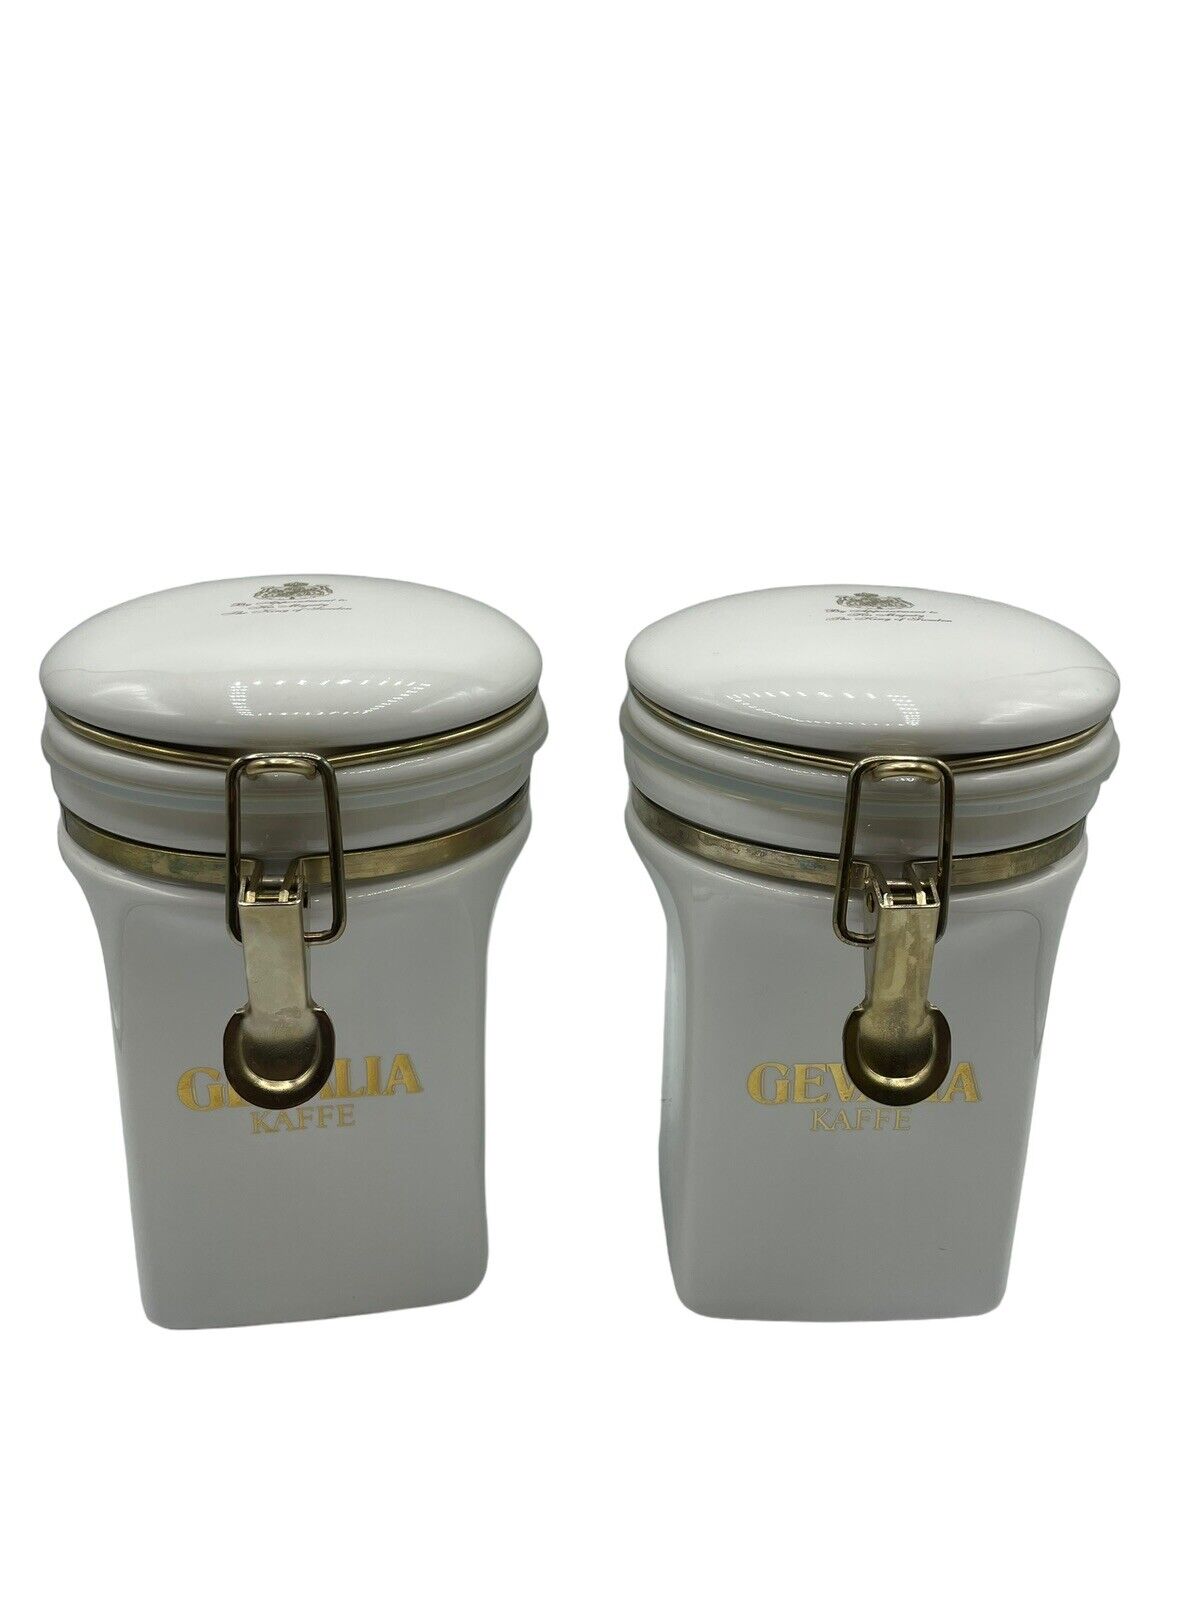 Gevalia New Open Box Set Of 2 White Coffee Canisters Original Box And Stickers